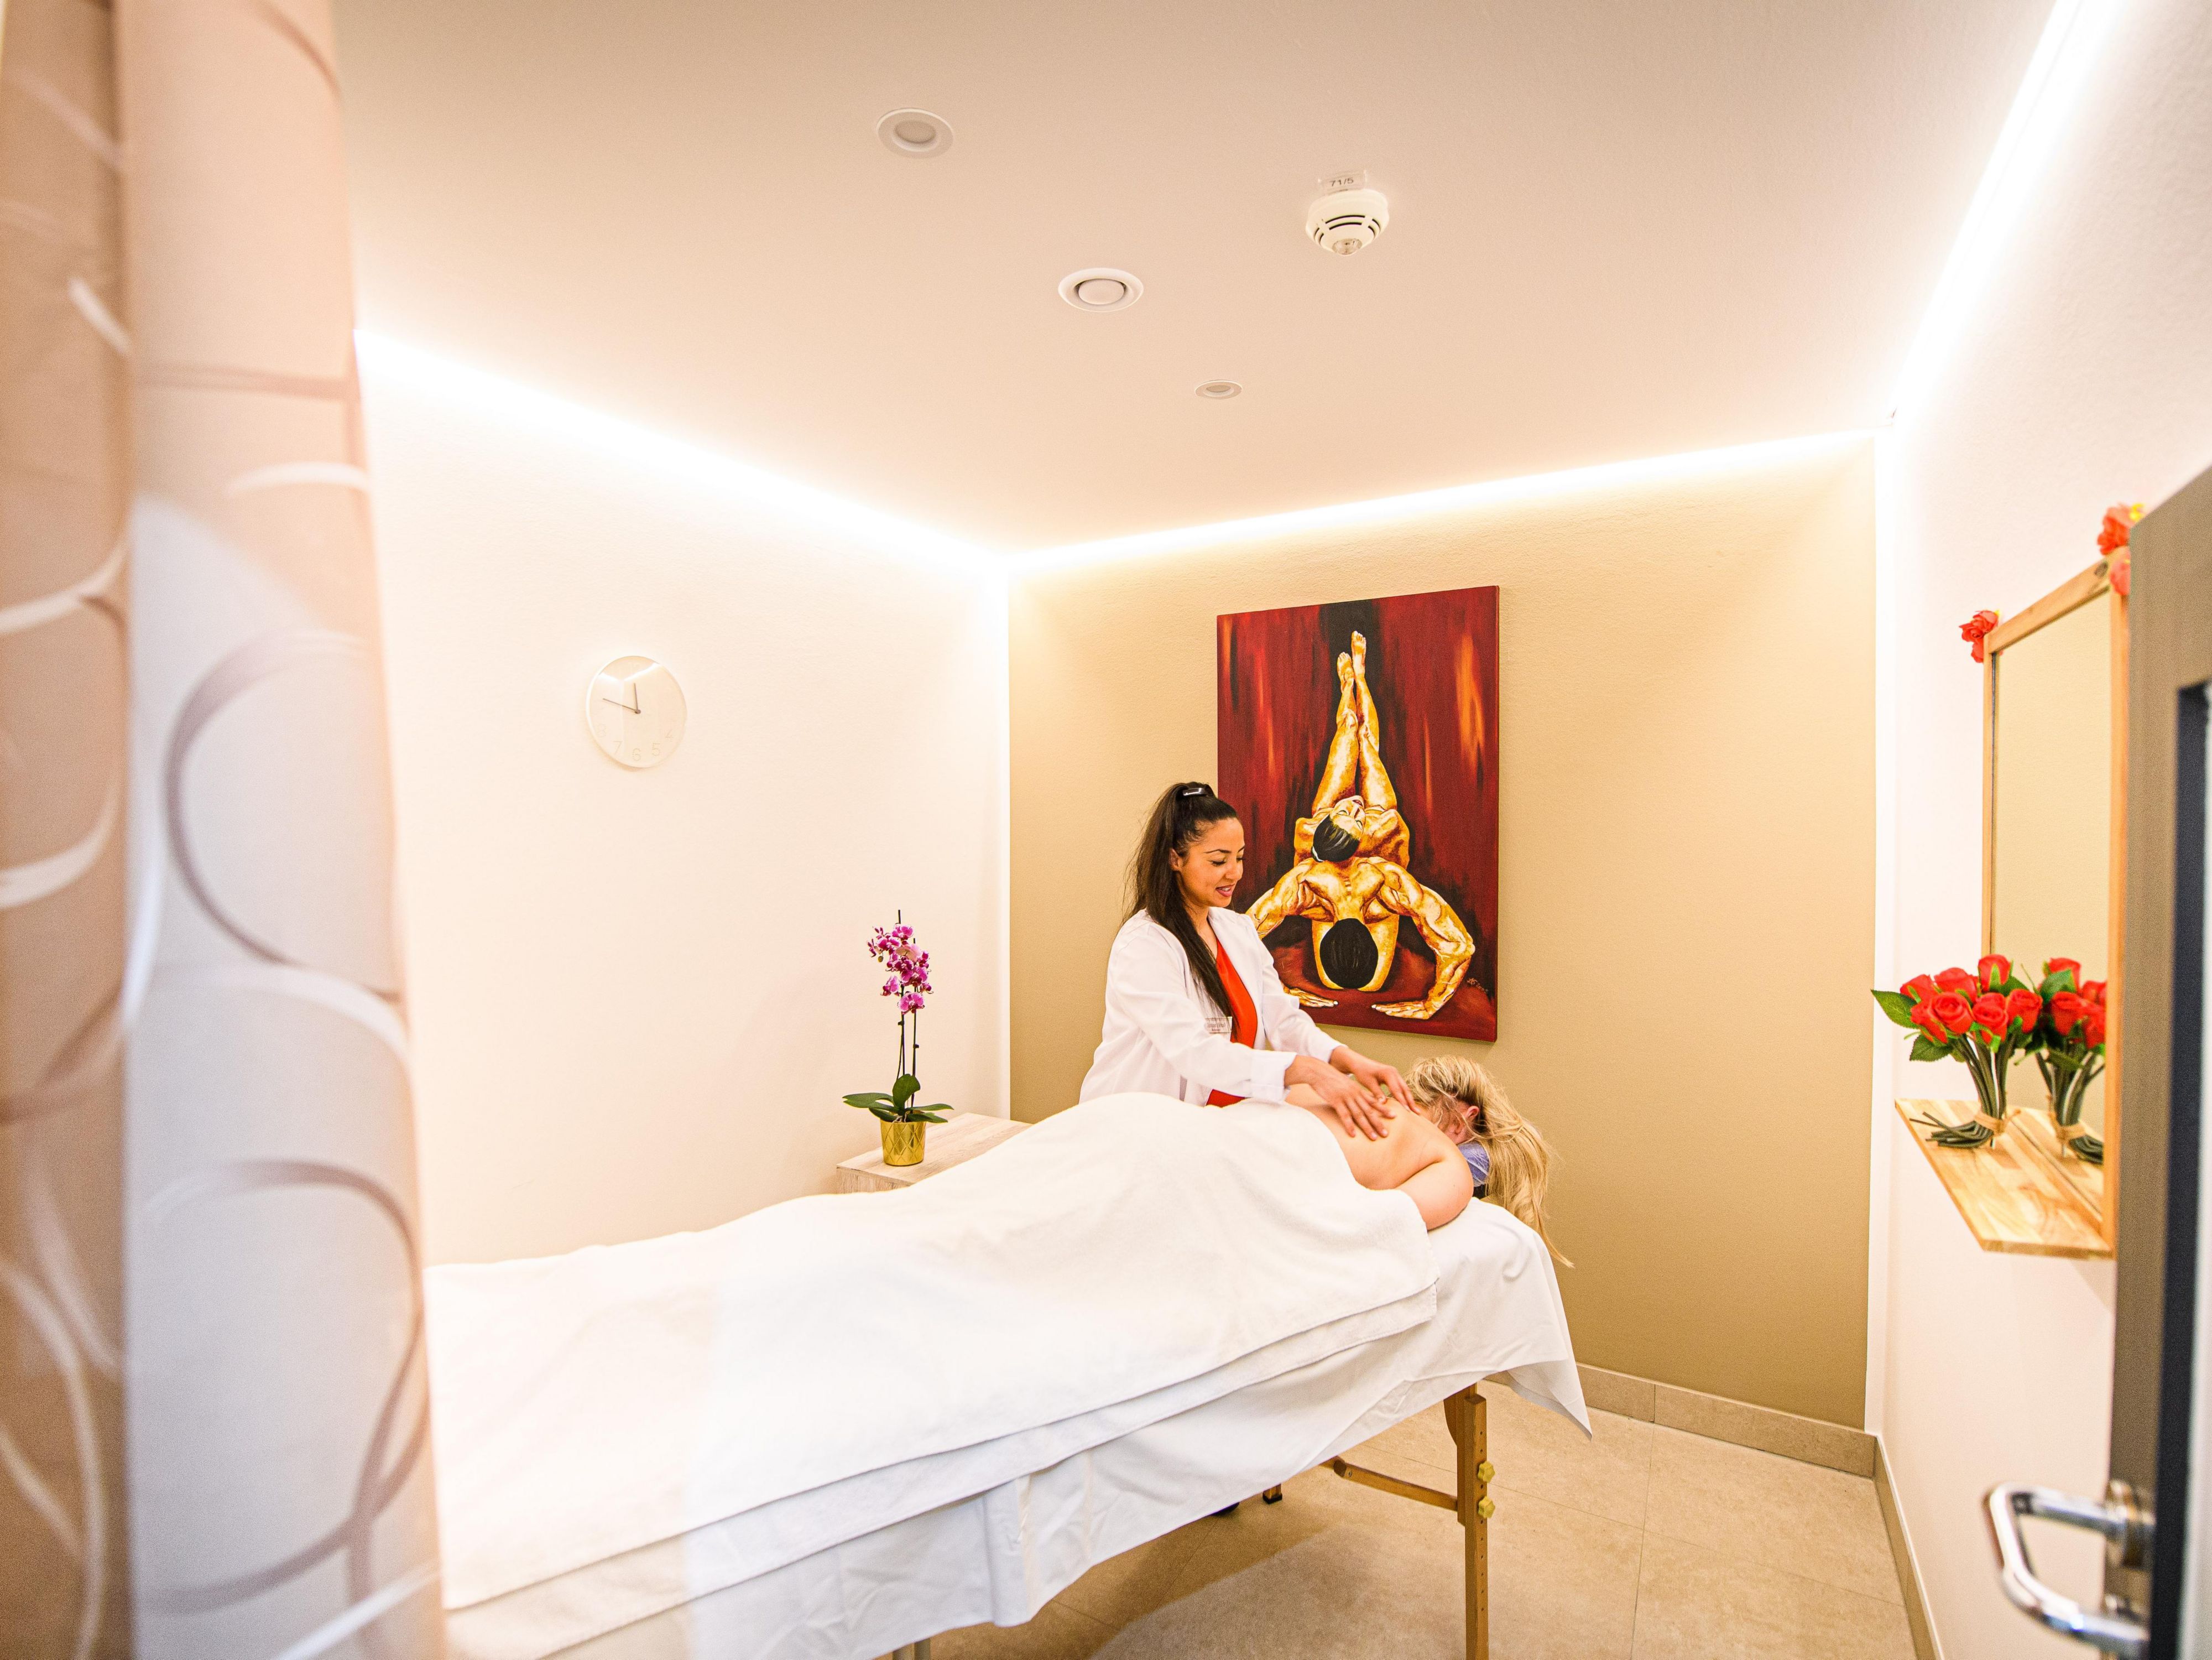 Treat yourself to our extensive massage and spa offer. Be it relaxing massages, carried out by external, certified specialists or exotic fish or snail spa. We make sure that you get to enjoy the complete relaxation programme to your heart's content! You can book your appointment via the website below.